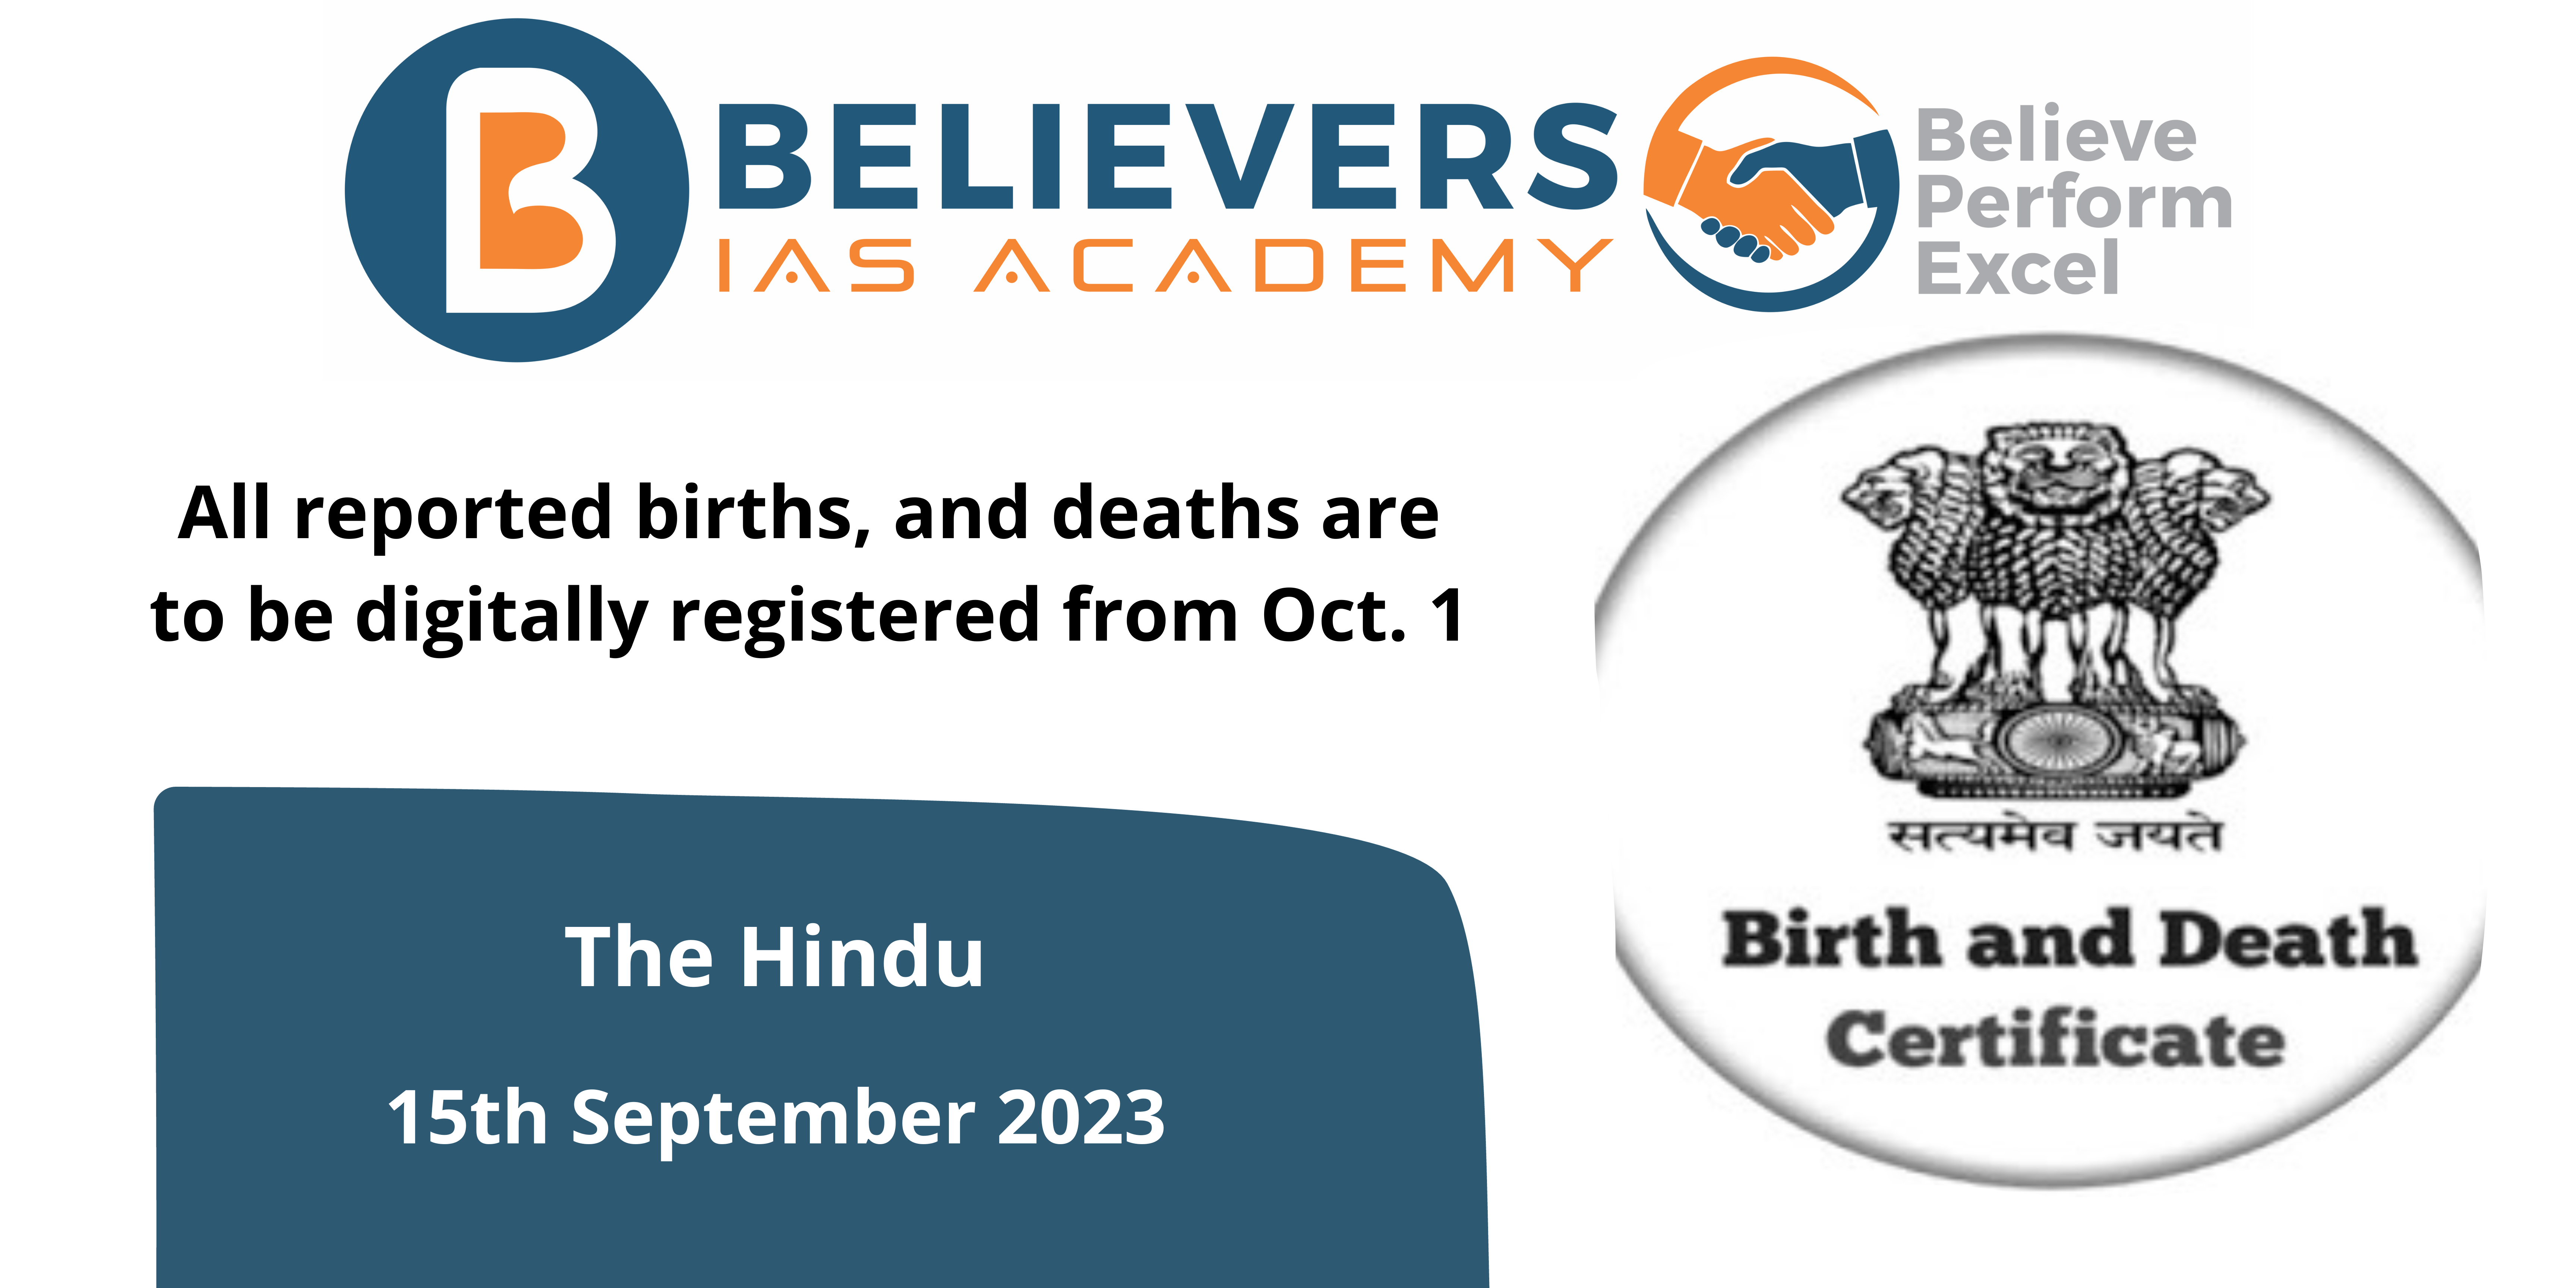 All reported births, and deaths are to be digitally registered from Oct. 1